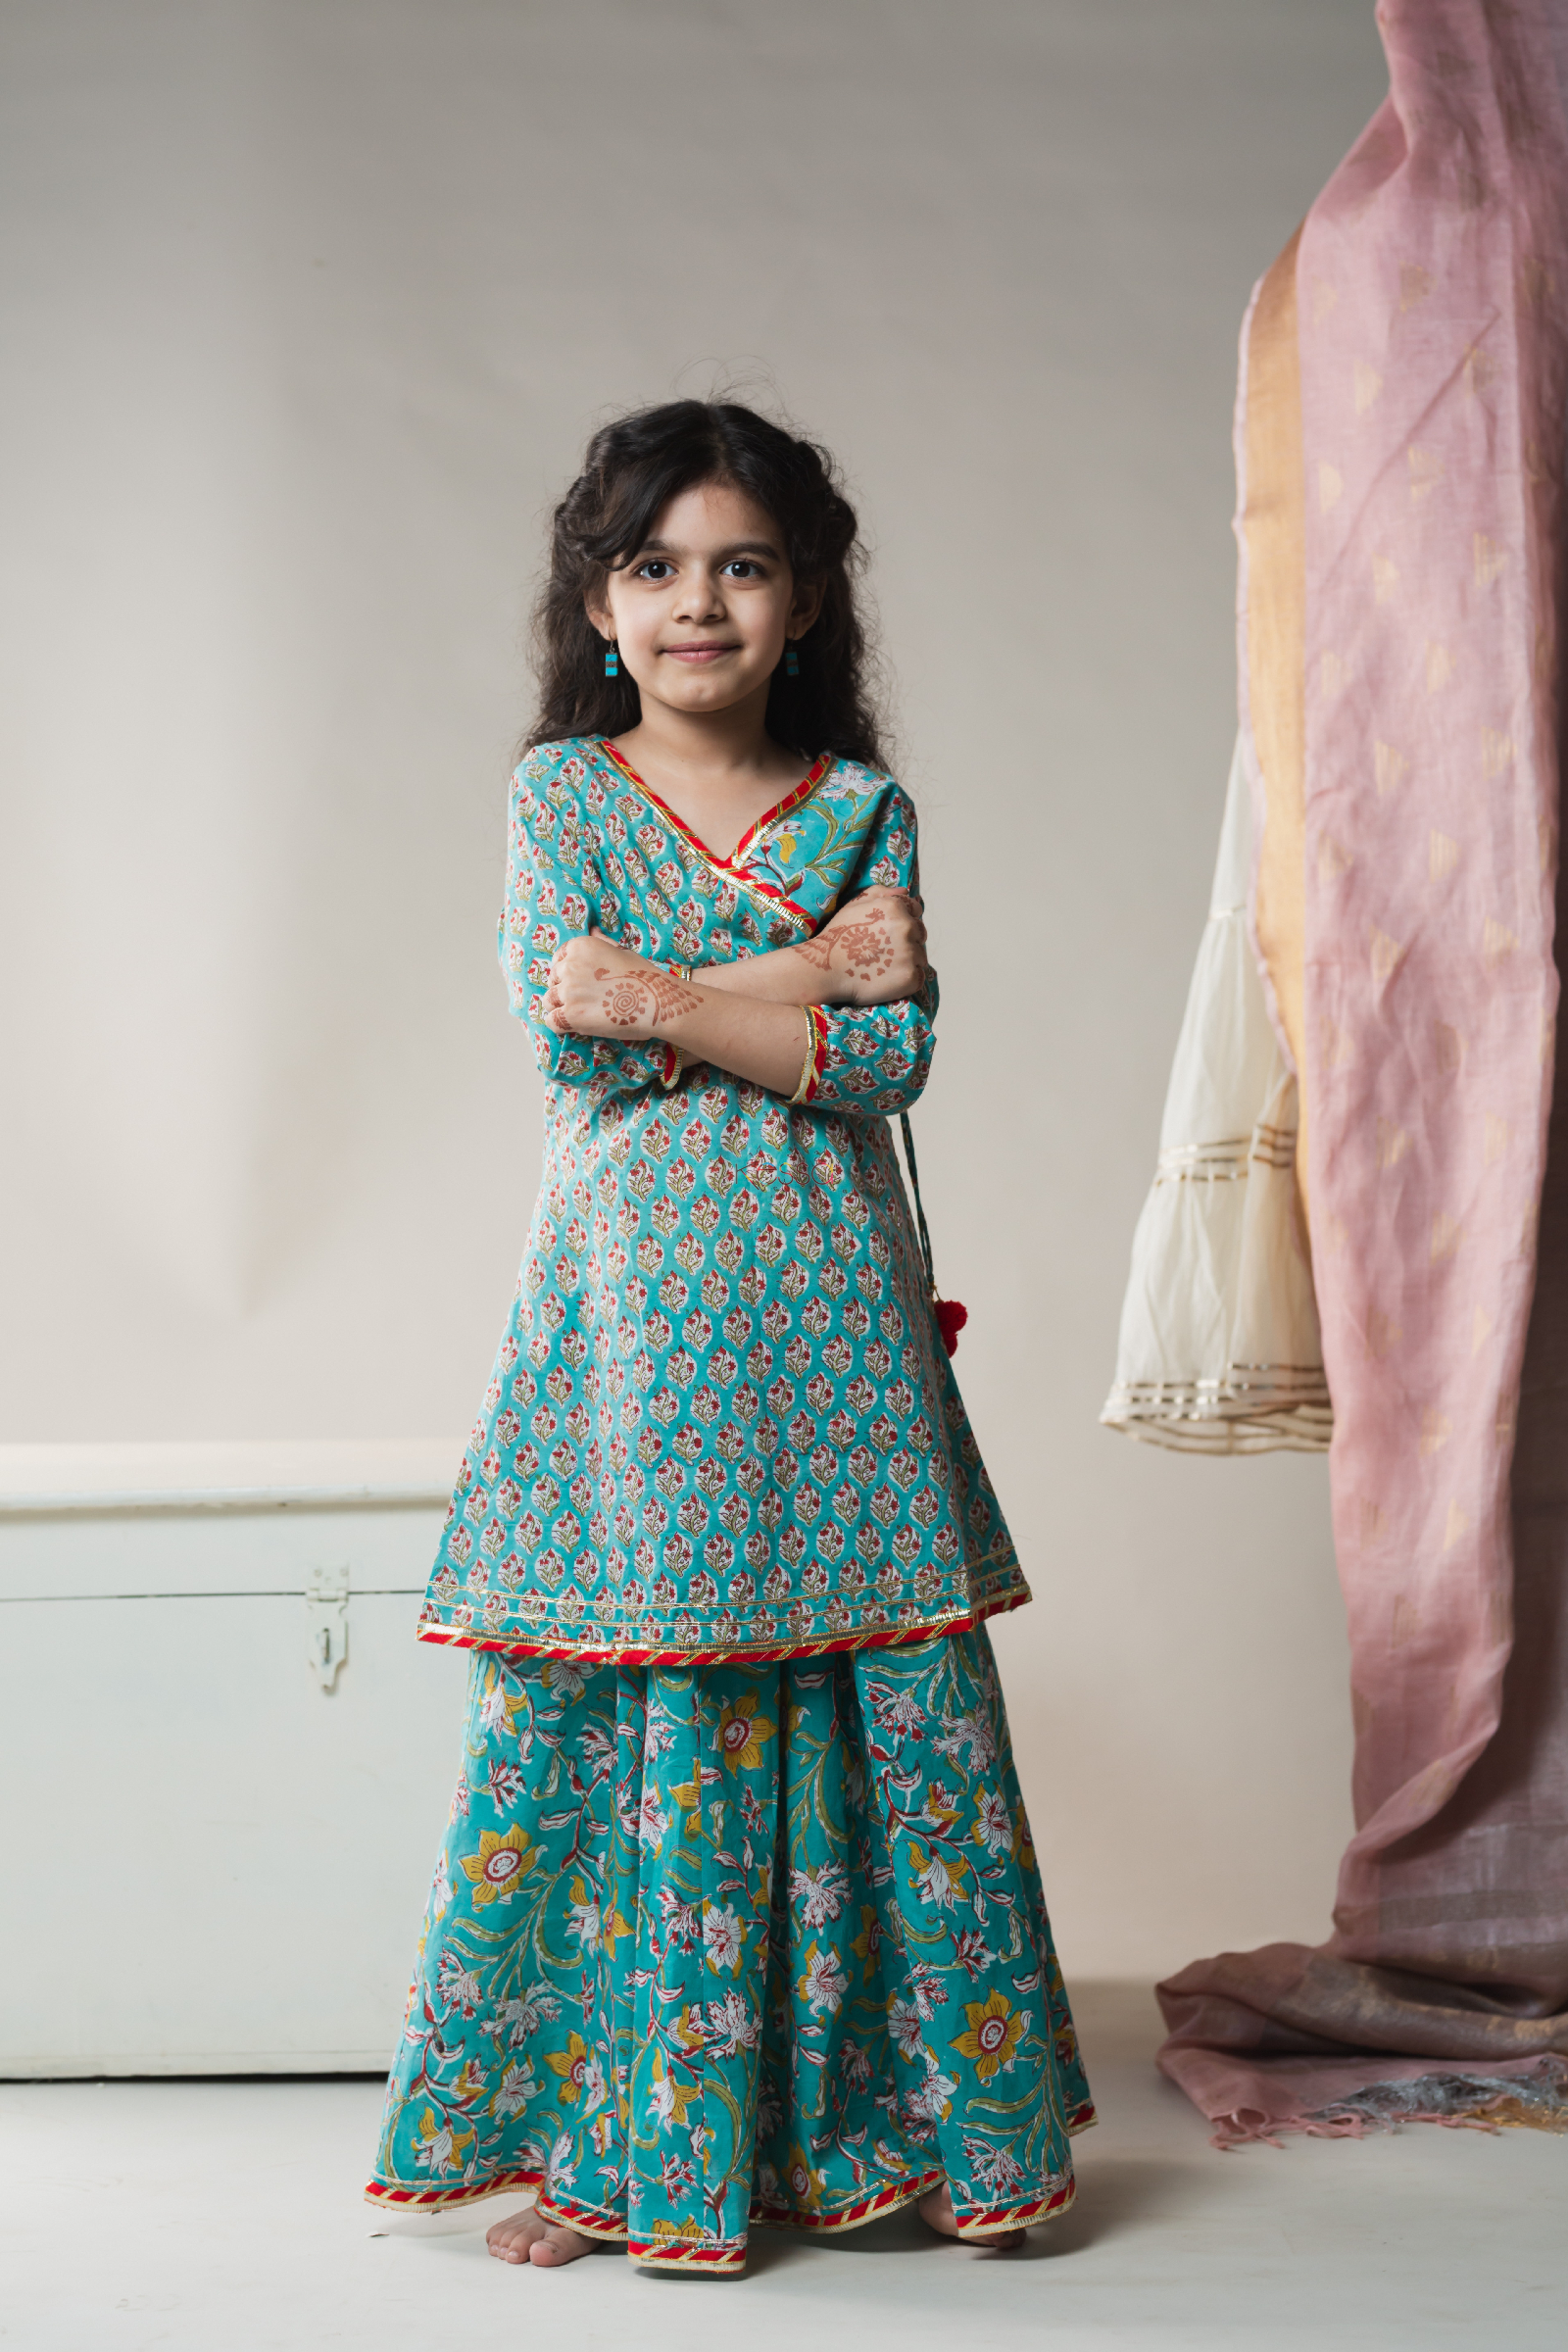 KIDS Only Skirts  Buy KIDS Only Girls Checked Black Skirt Online  Nykaa  Fashion